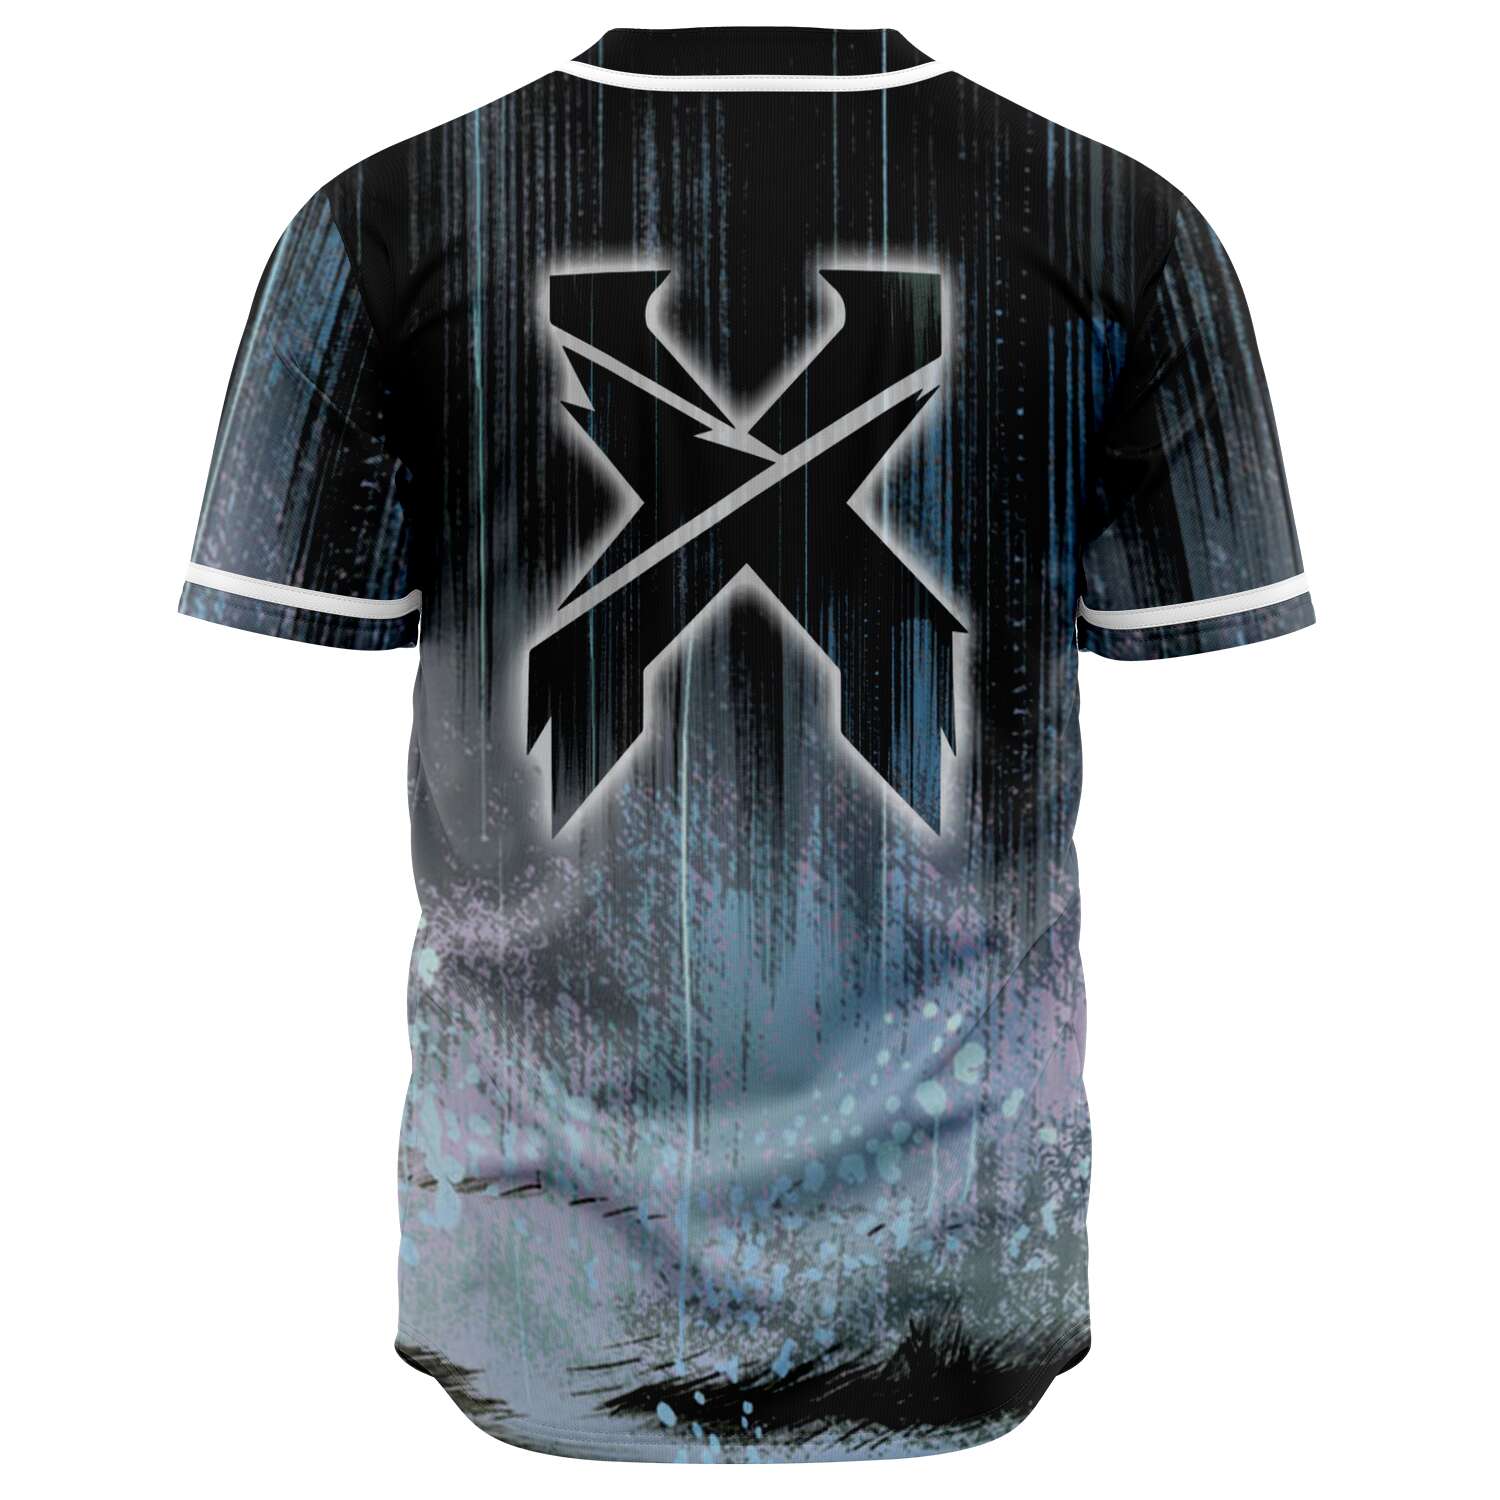 Excision Soccer Jersey -  Canada